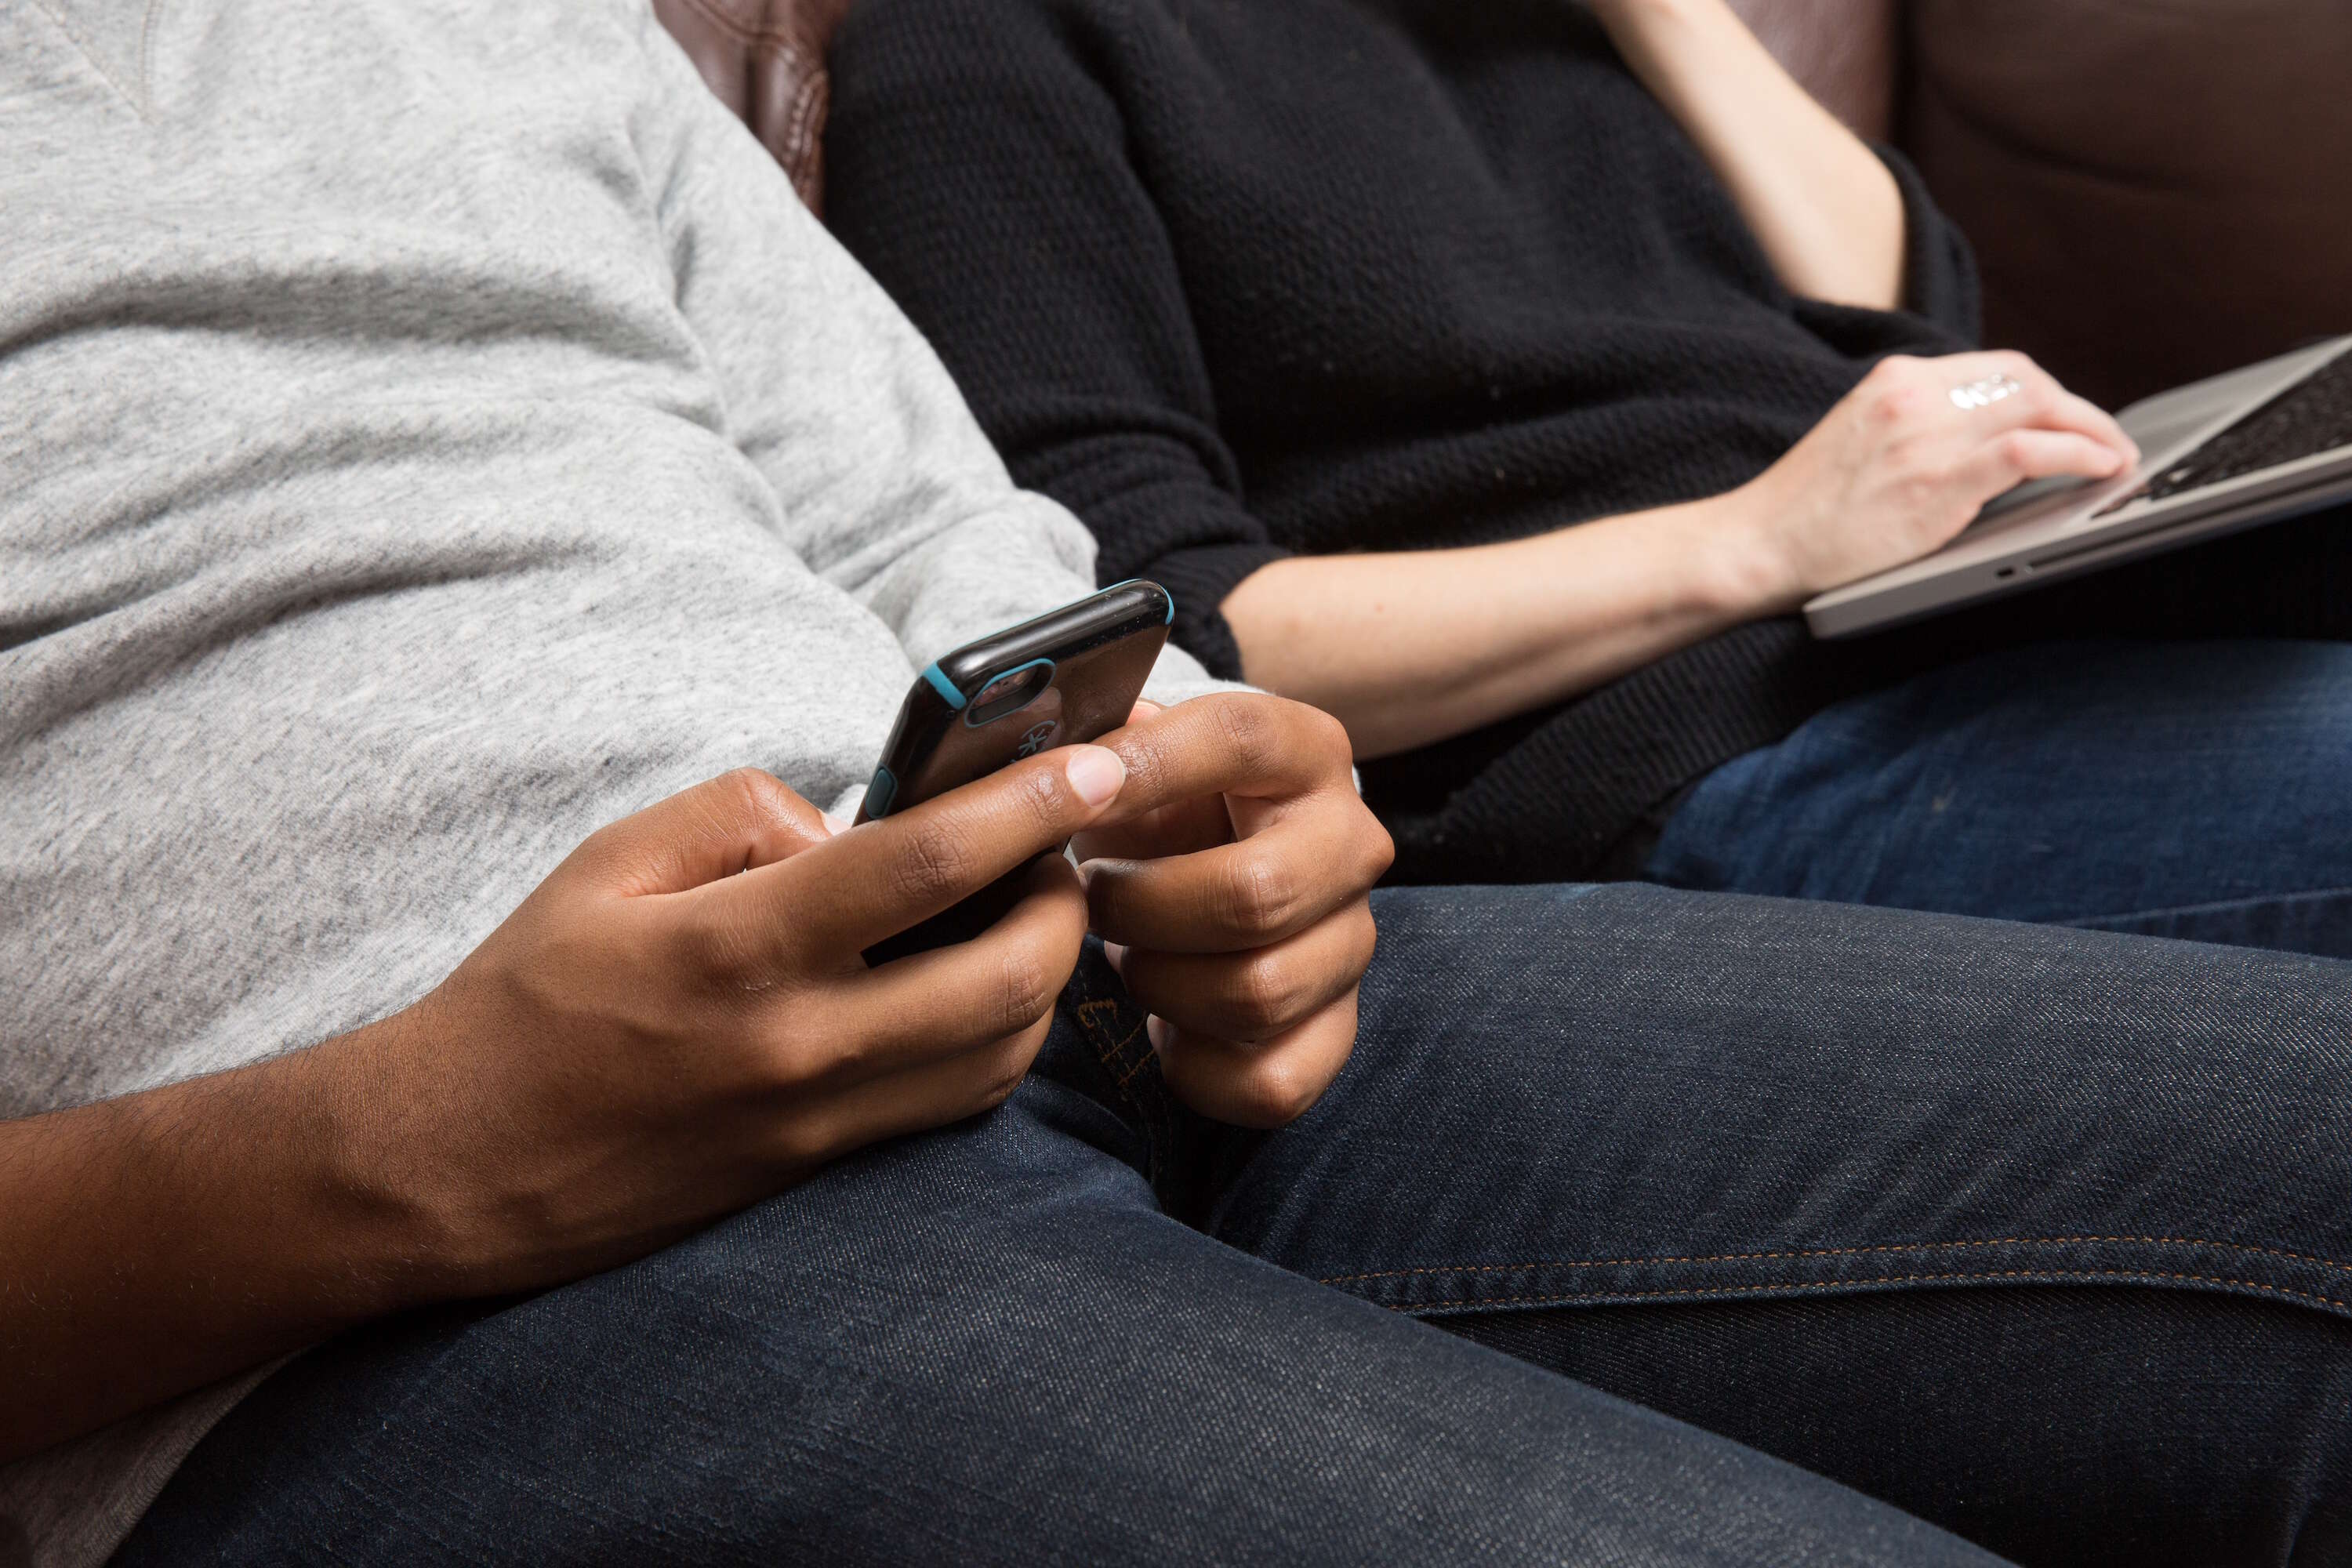 man texting next to woman on couch